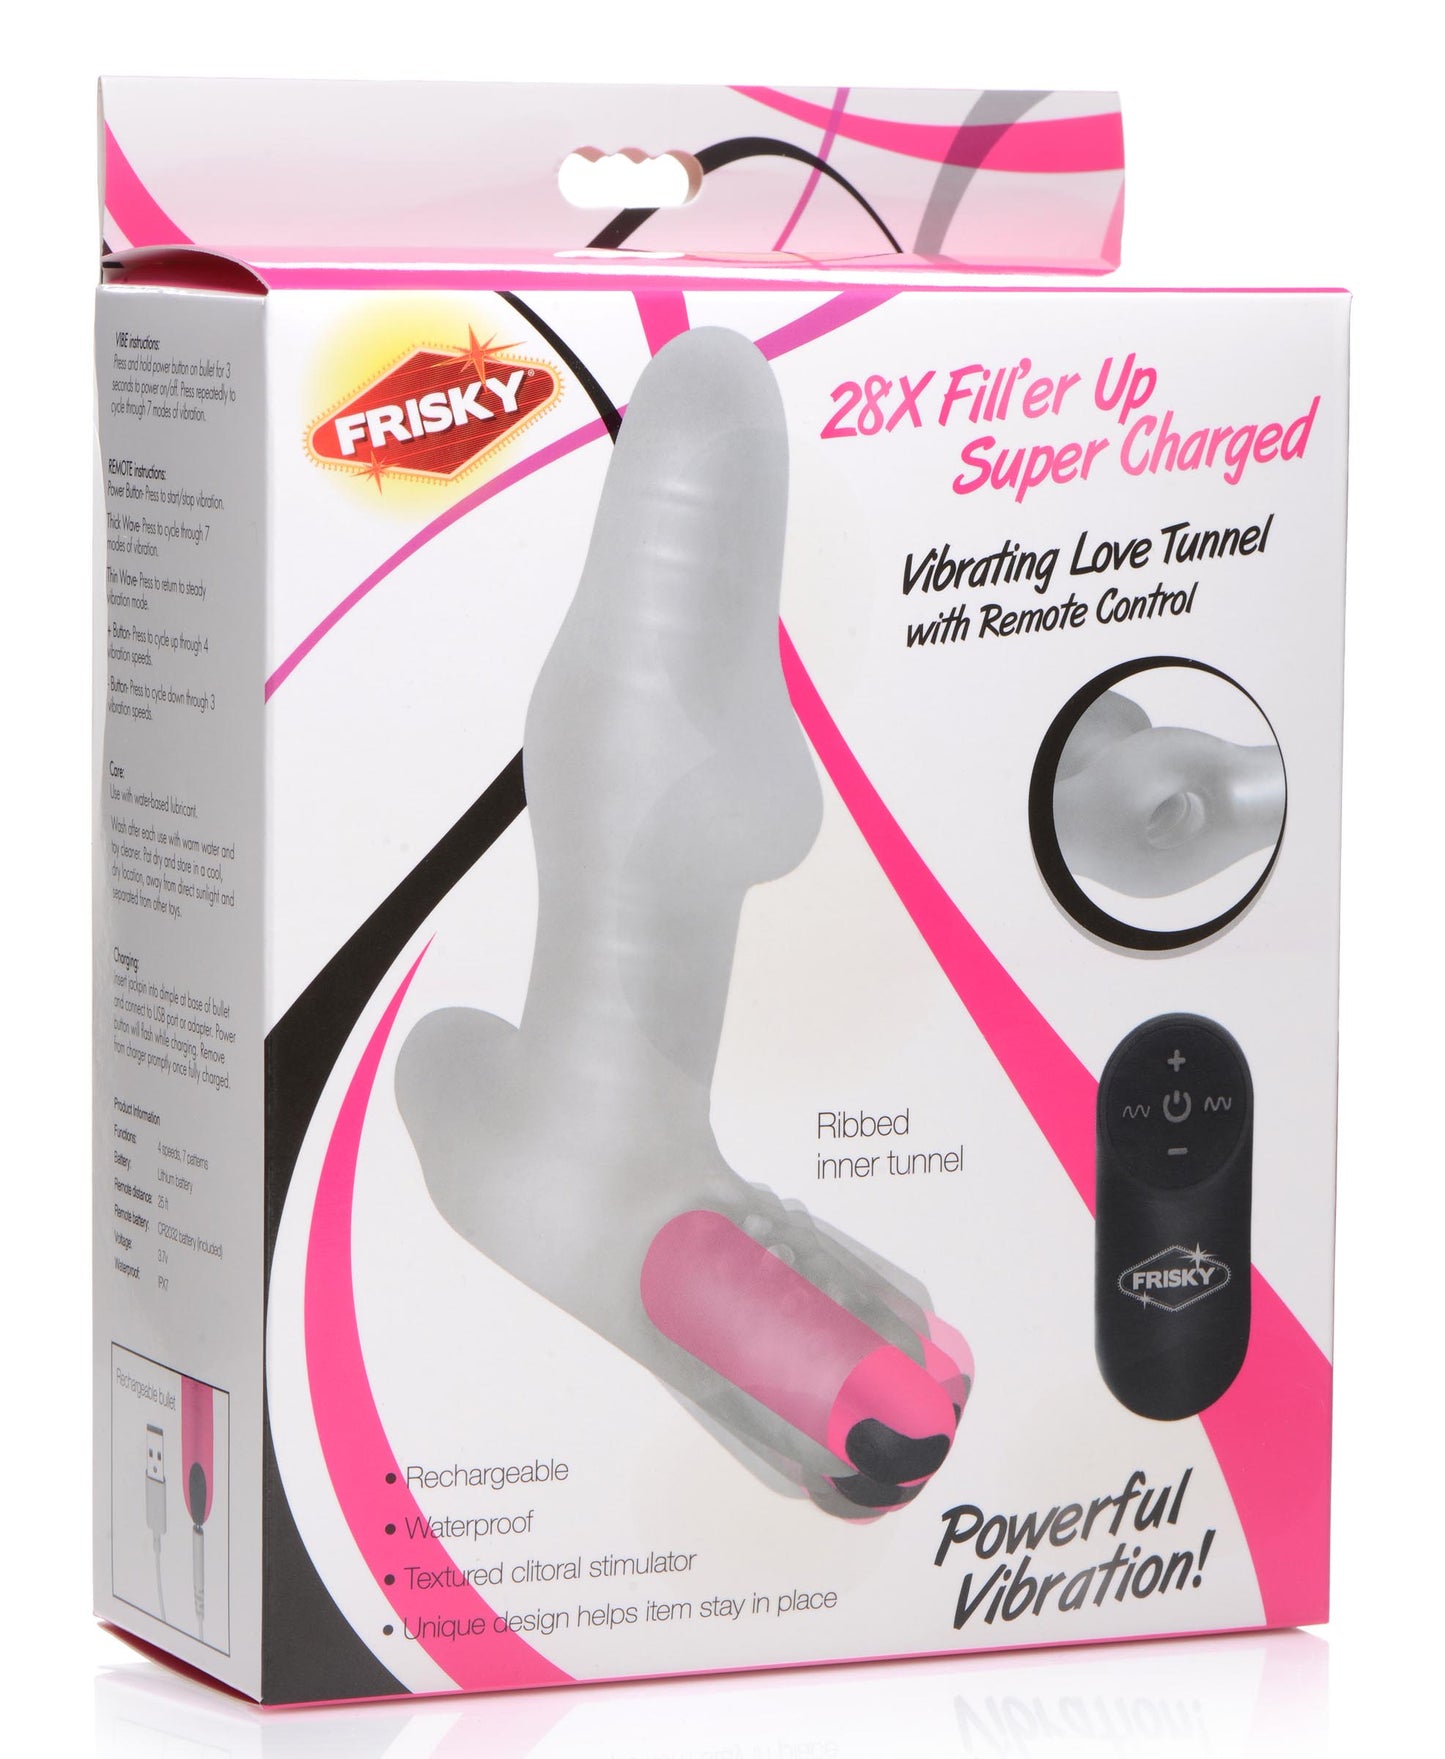 28X Filler Up Super Charged Vibrating Love Tunnel with Remote Control - UABDSM